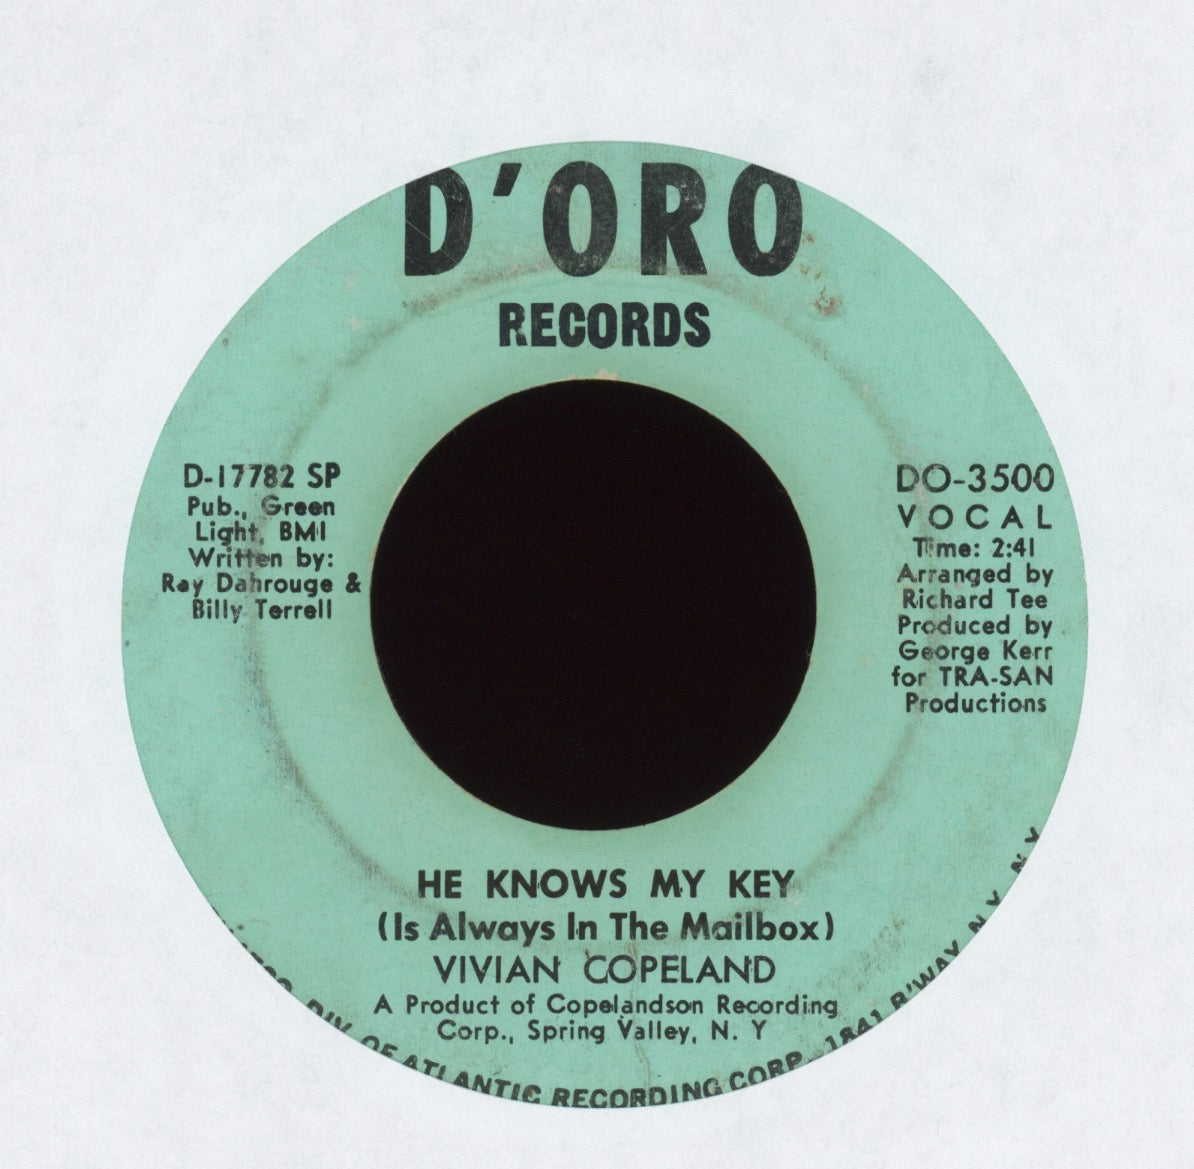 Vivian Copeland - He Knows My Key (Is Always In The Mailbox) on D'Oro Northern Soul 45